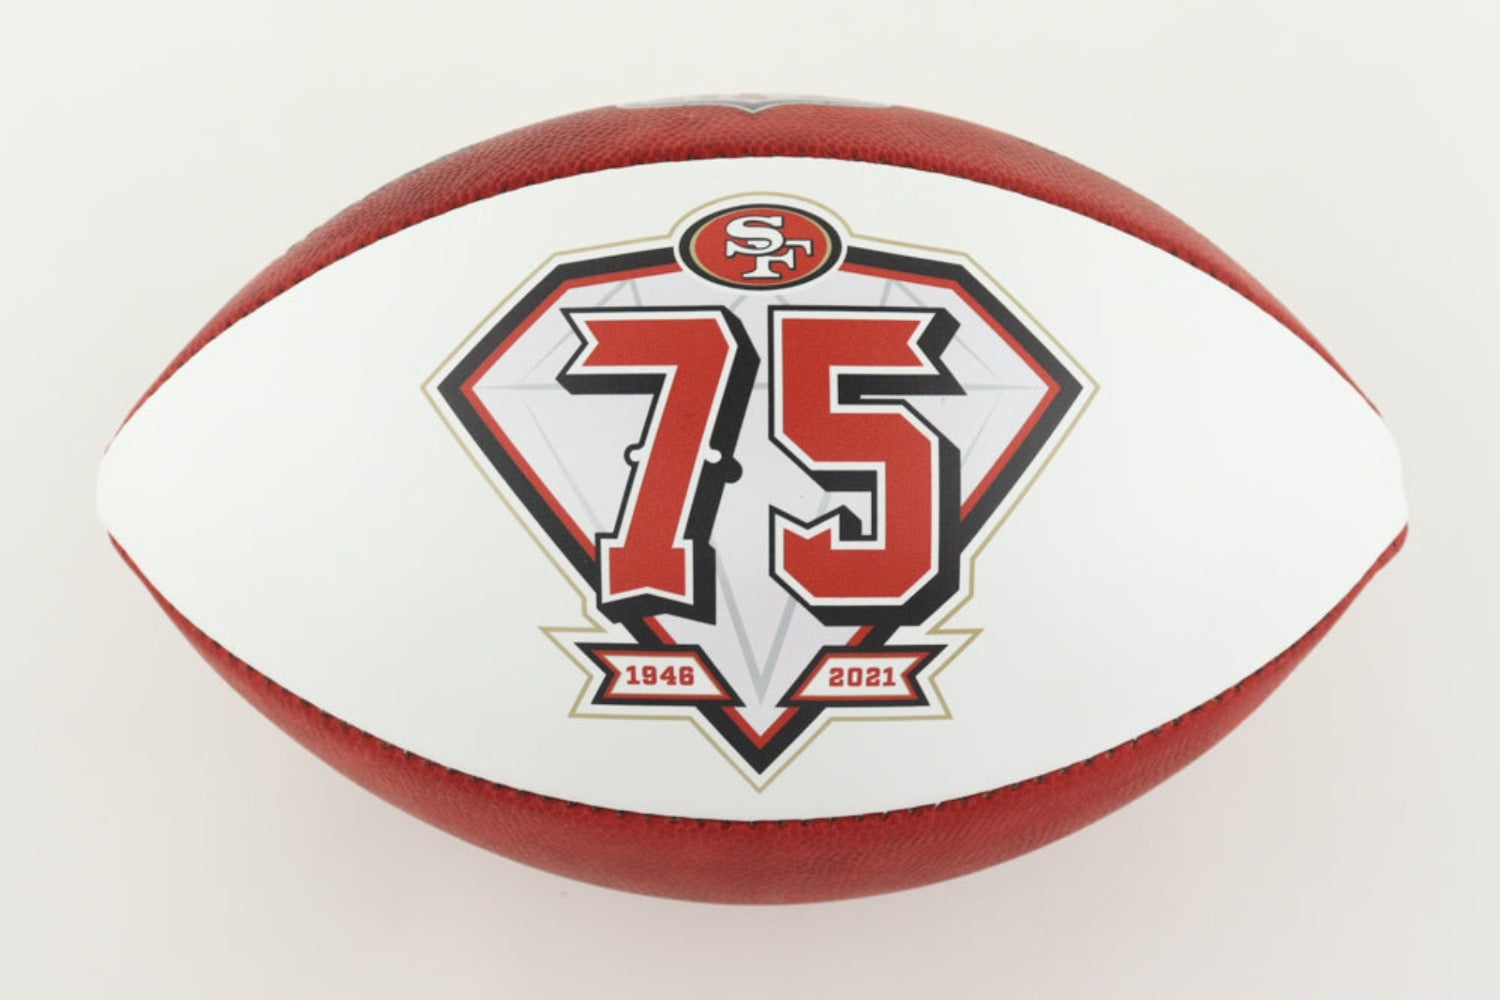 49ers Commemorative 75th Anniversary 'The Duke' Official NFL Game Ball